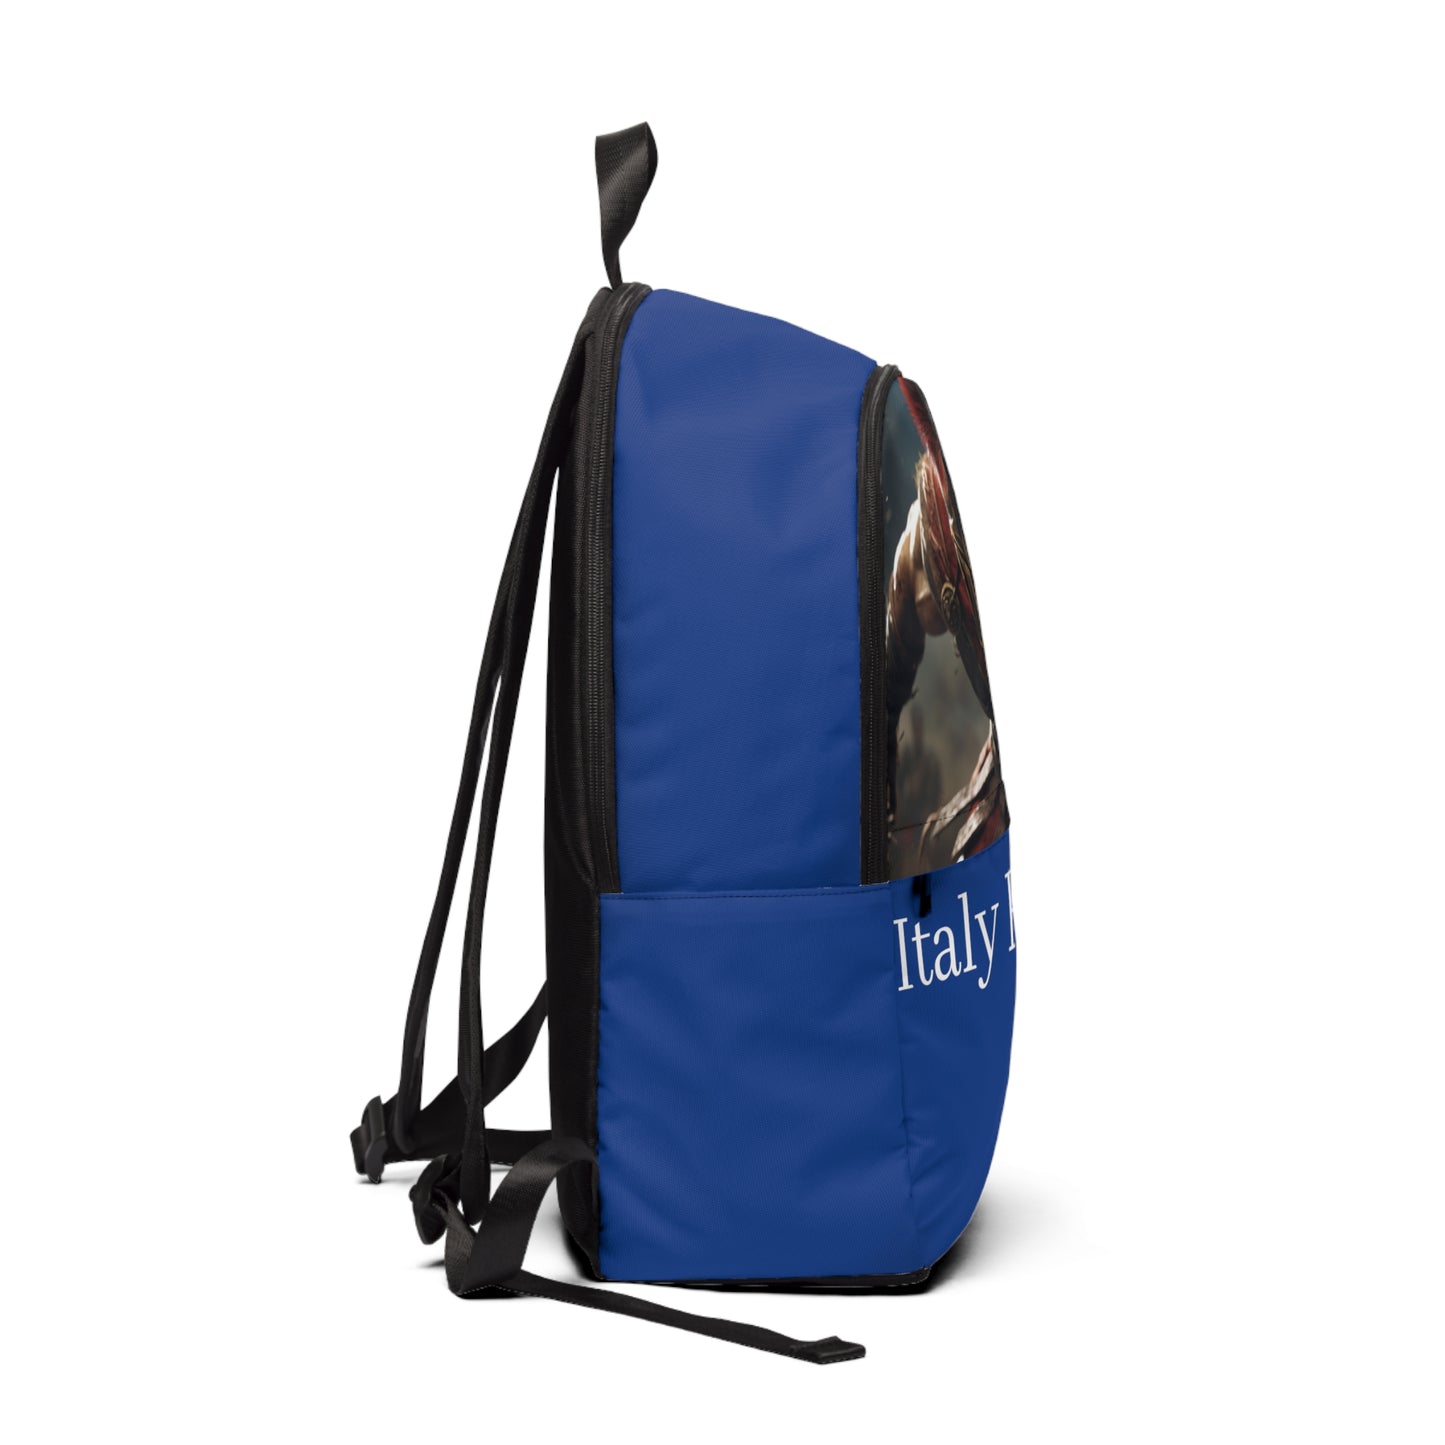 Italy backpack